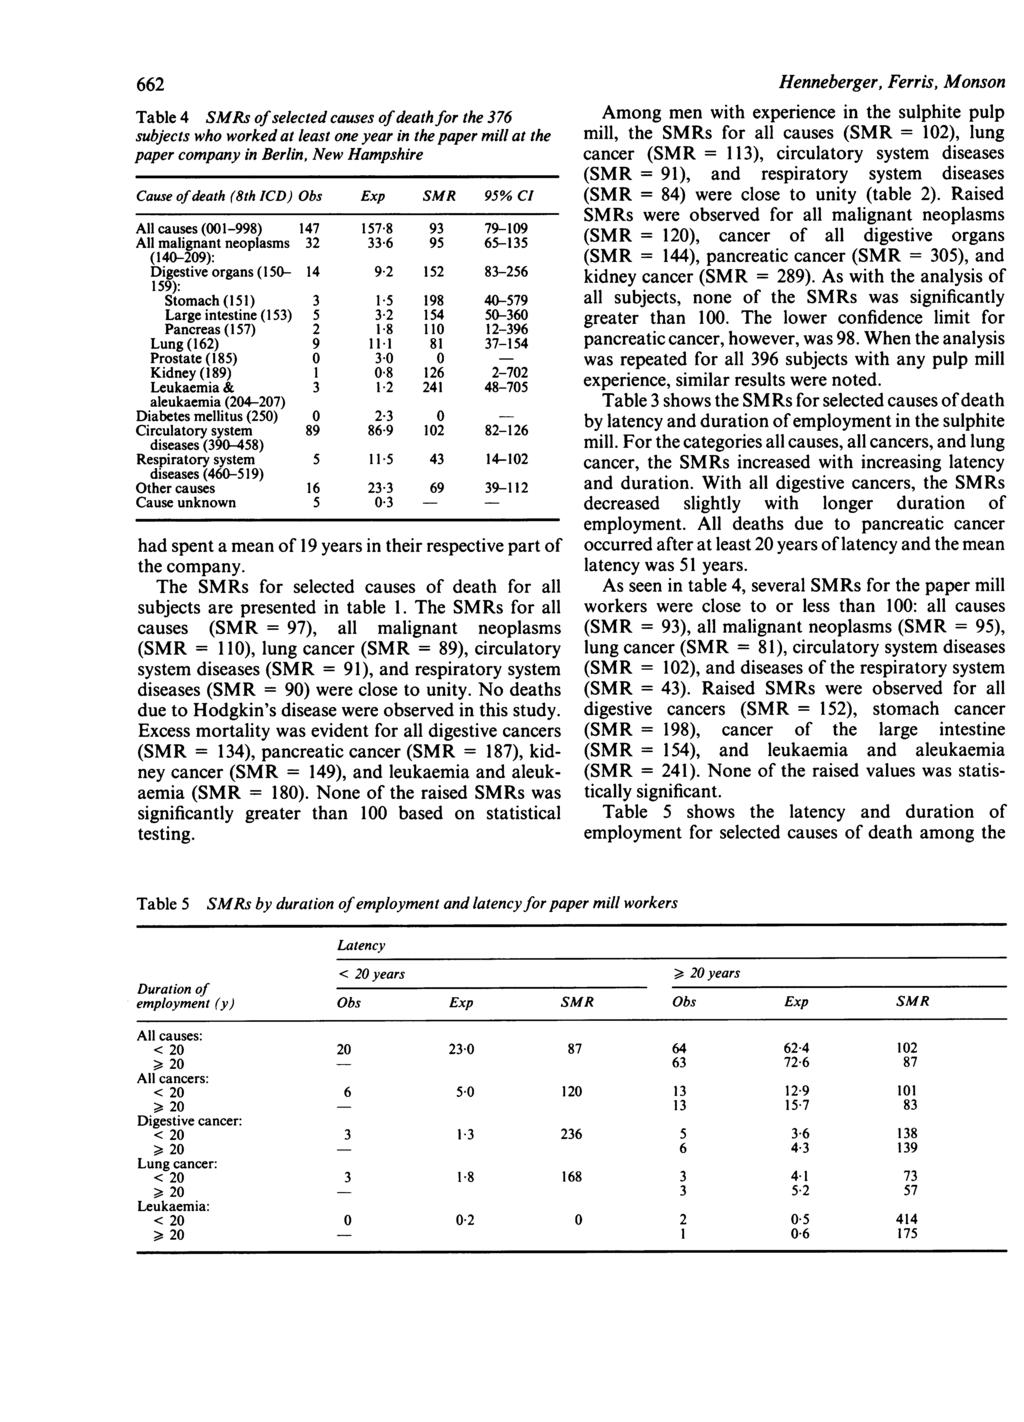 662 Table 4 SMRs ofselected causes ofdeath for the 376 subjects who worked at least one year in the paper mill at the paper company in Berlin, New Hampshire Cause ofdeath (8th ICD) Obs Exp SMR 95% CI